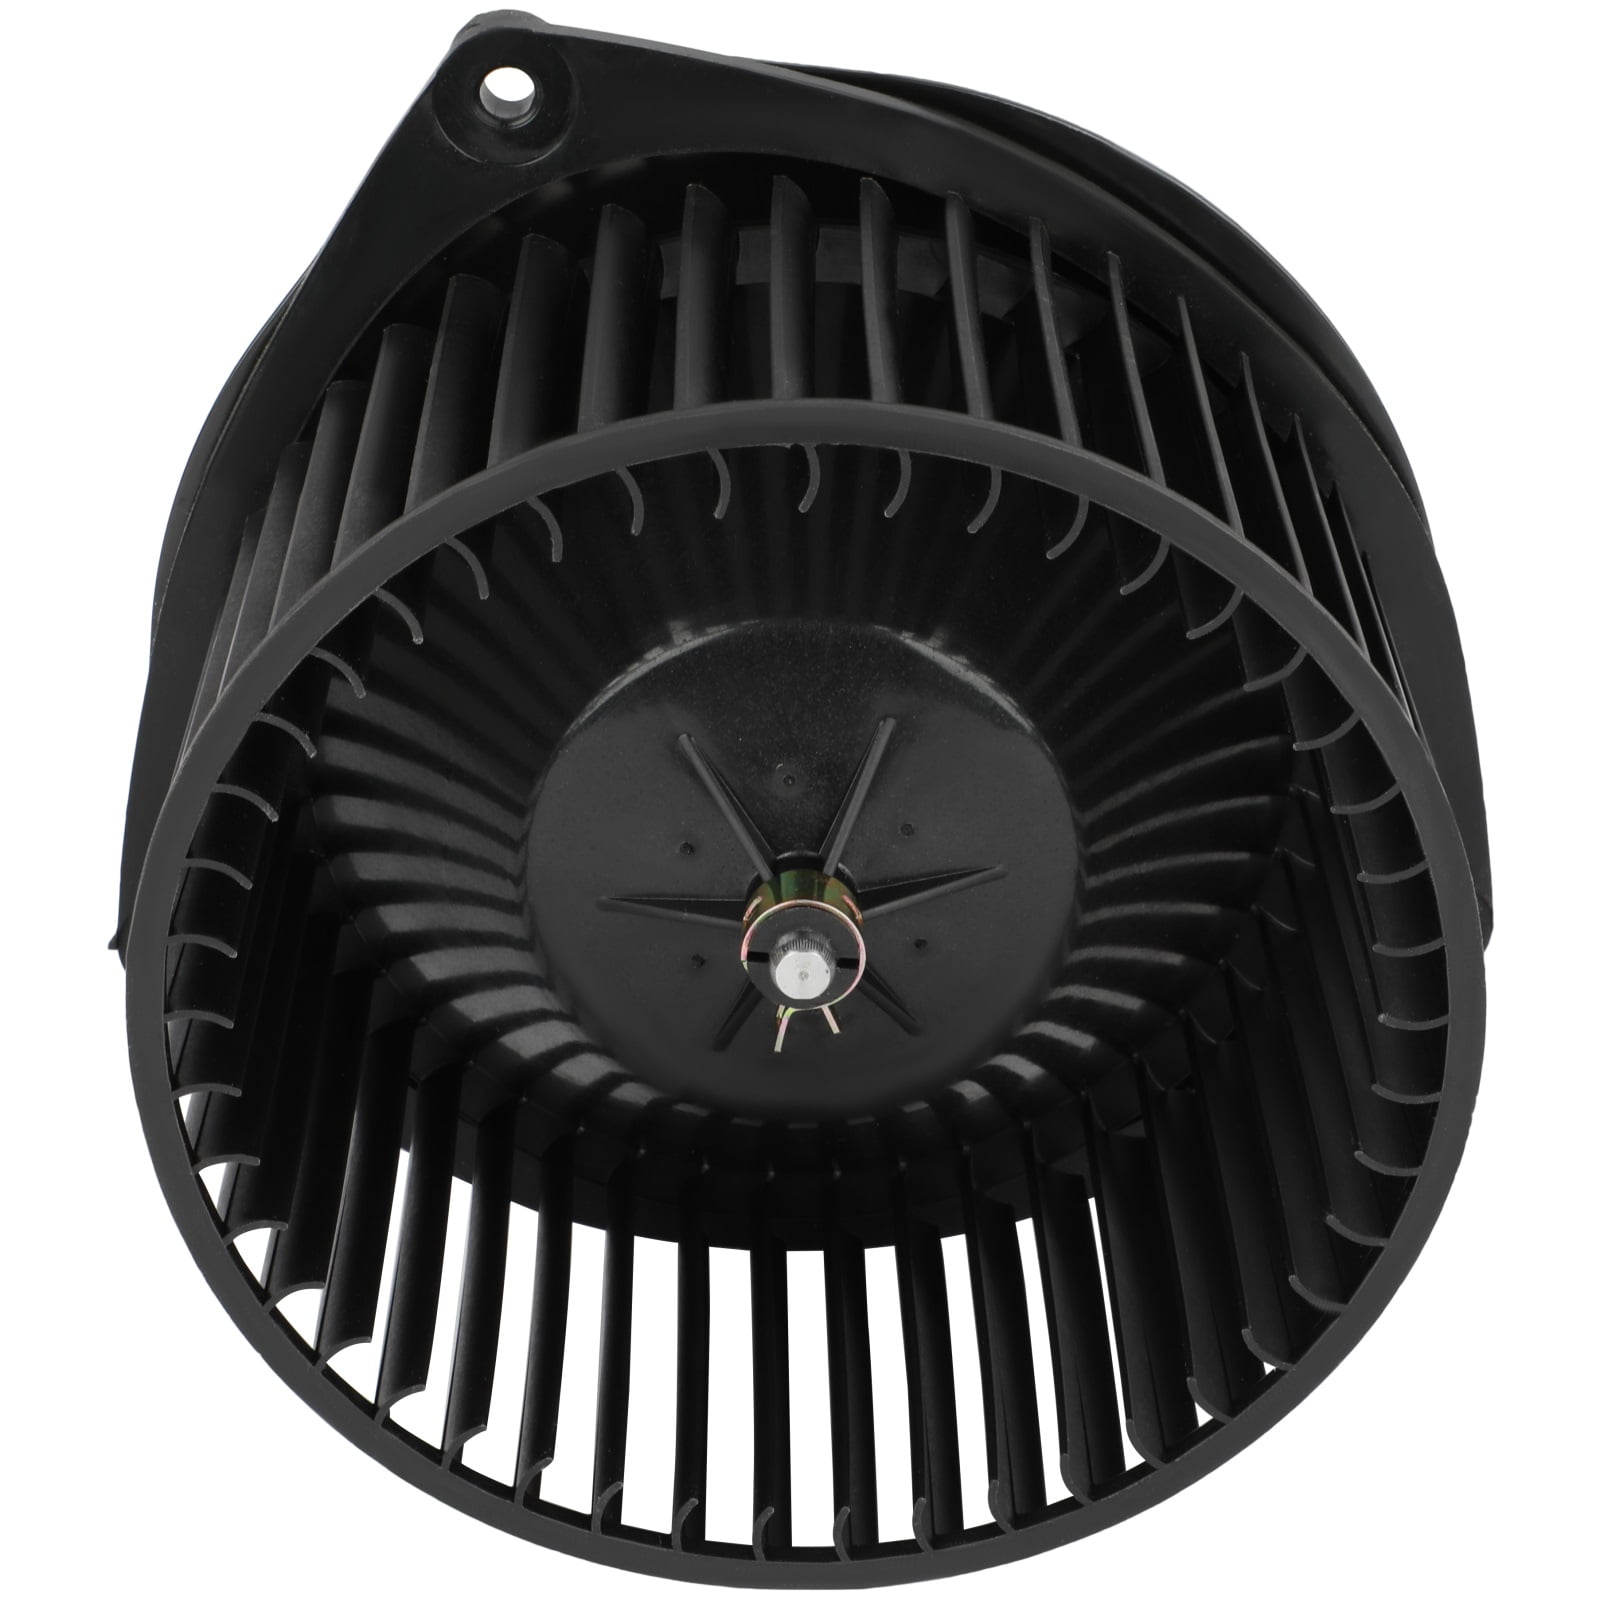 CCIYU HVAC Heater Blower Motor with Wheel Fan Cage 5015869AA Air  Conditioning AC Blower Motor fit for 1995-2003 for Dodge for Ram 1500 Van 1996-1997, 1999-2003 for Dodge for Ram 3500 Van